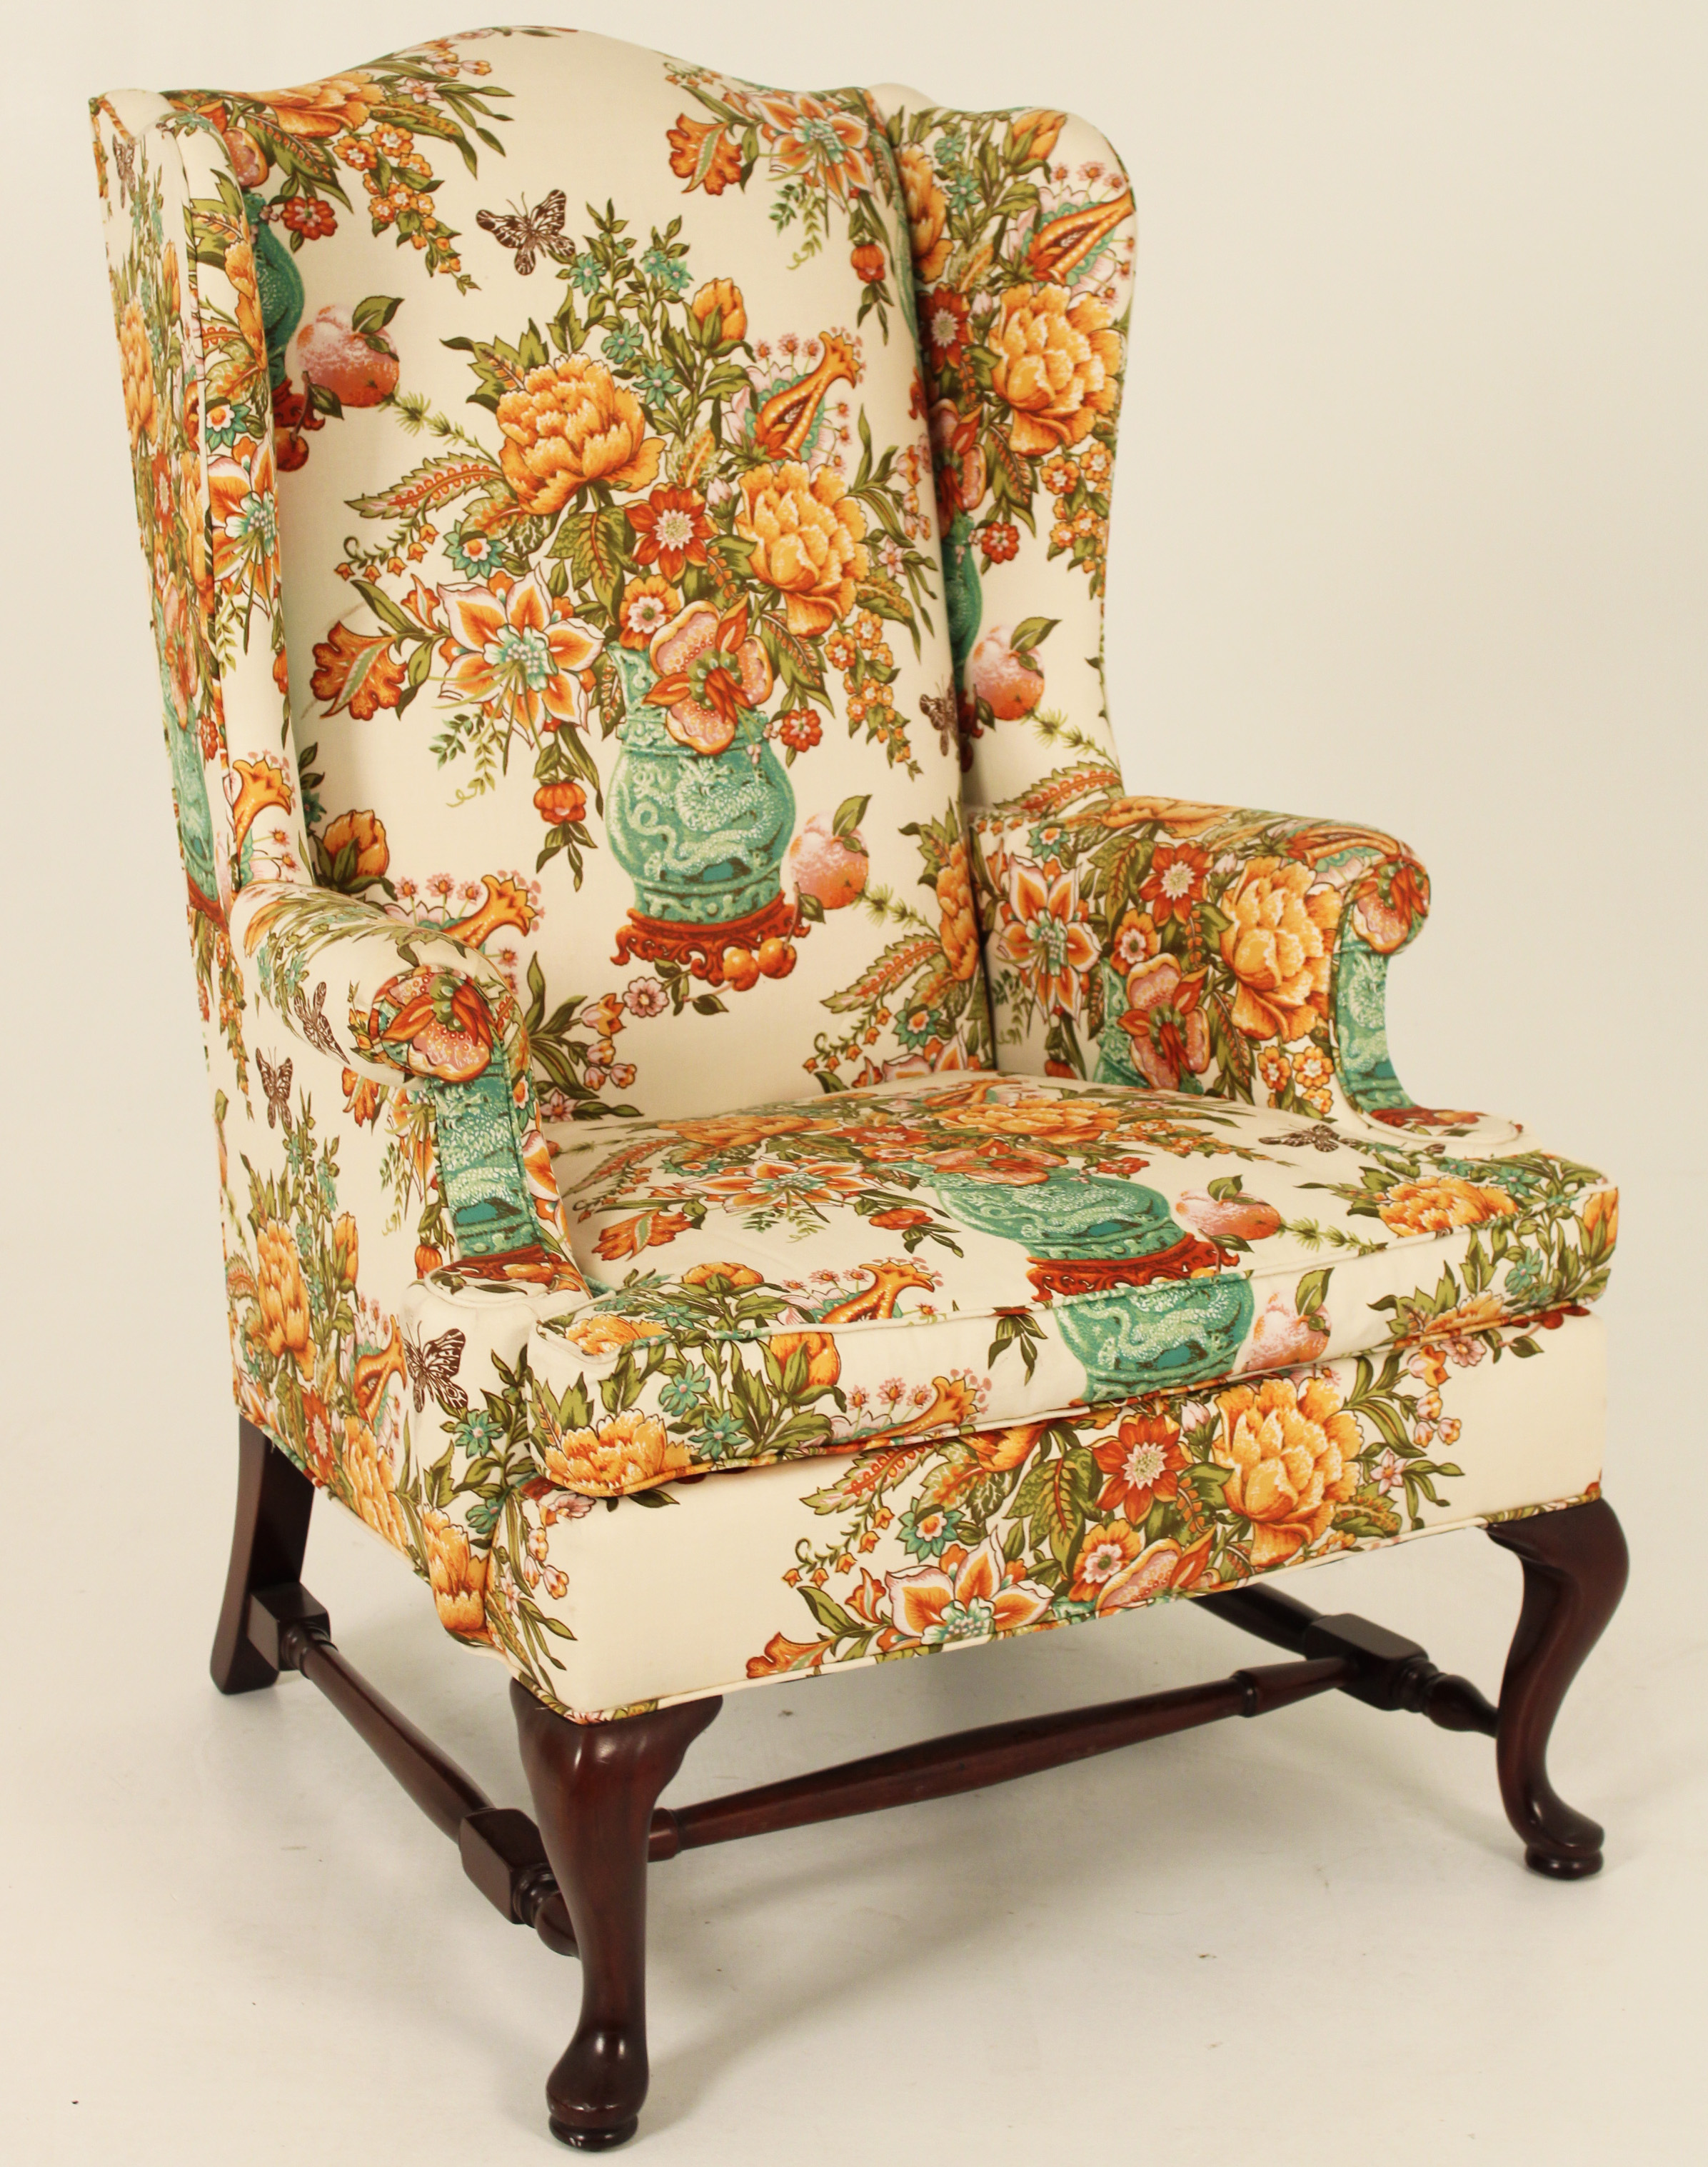 QUEEN ANNE STYLE WINGED ARMCHAIR